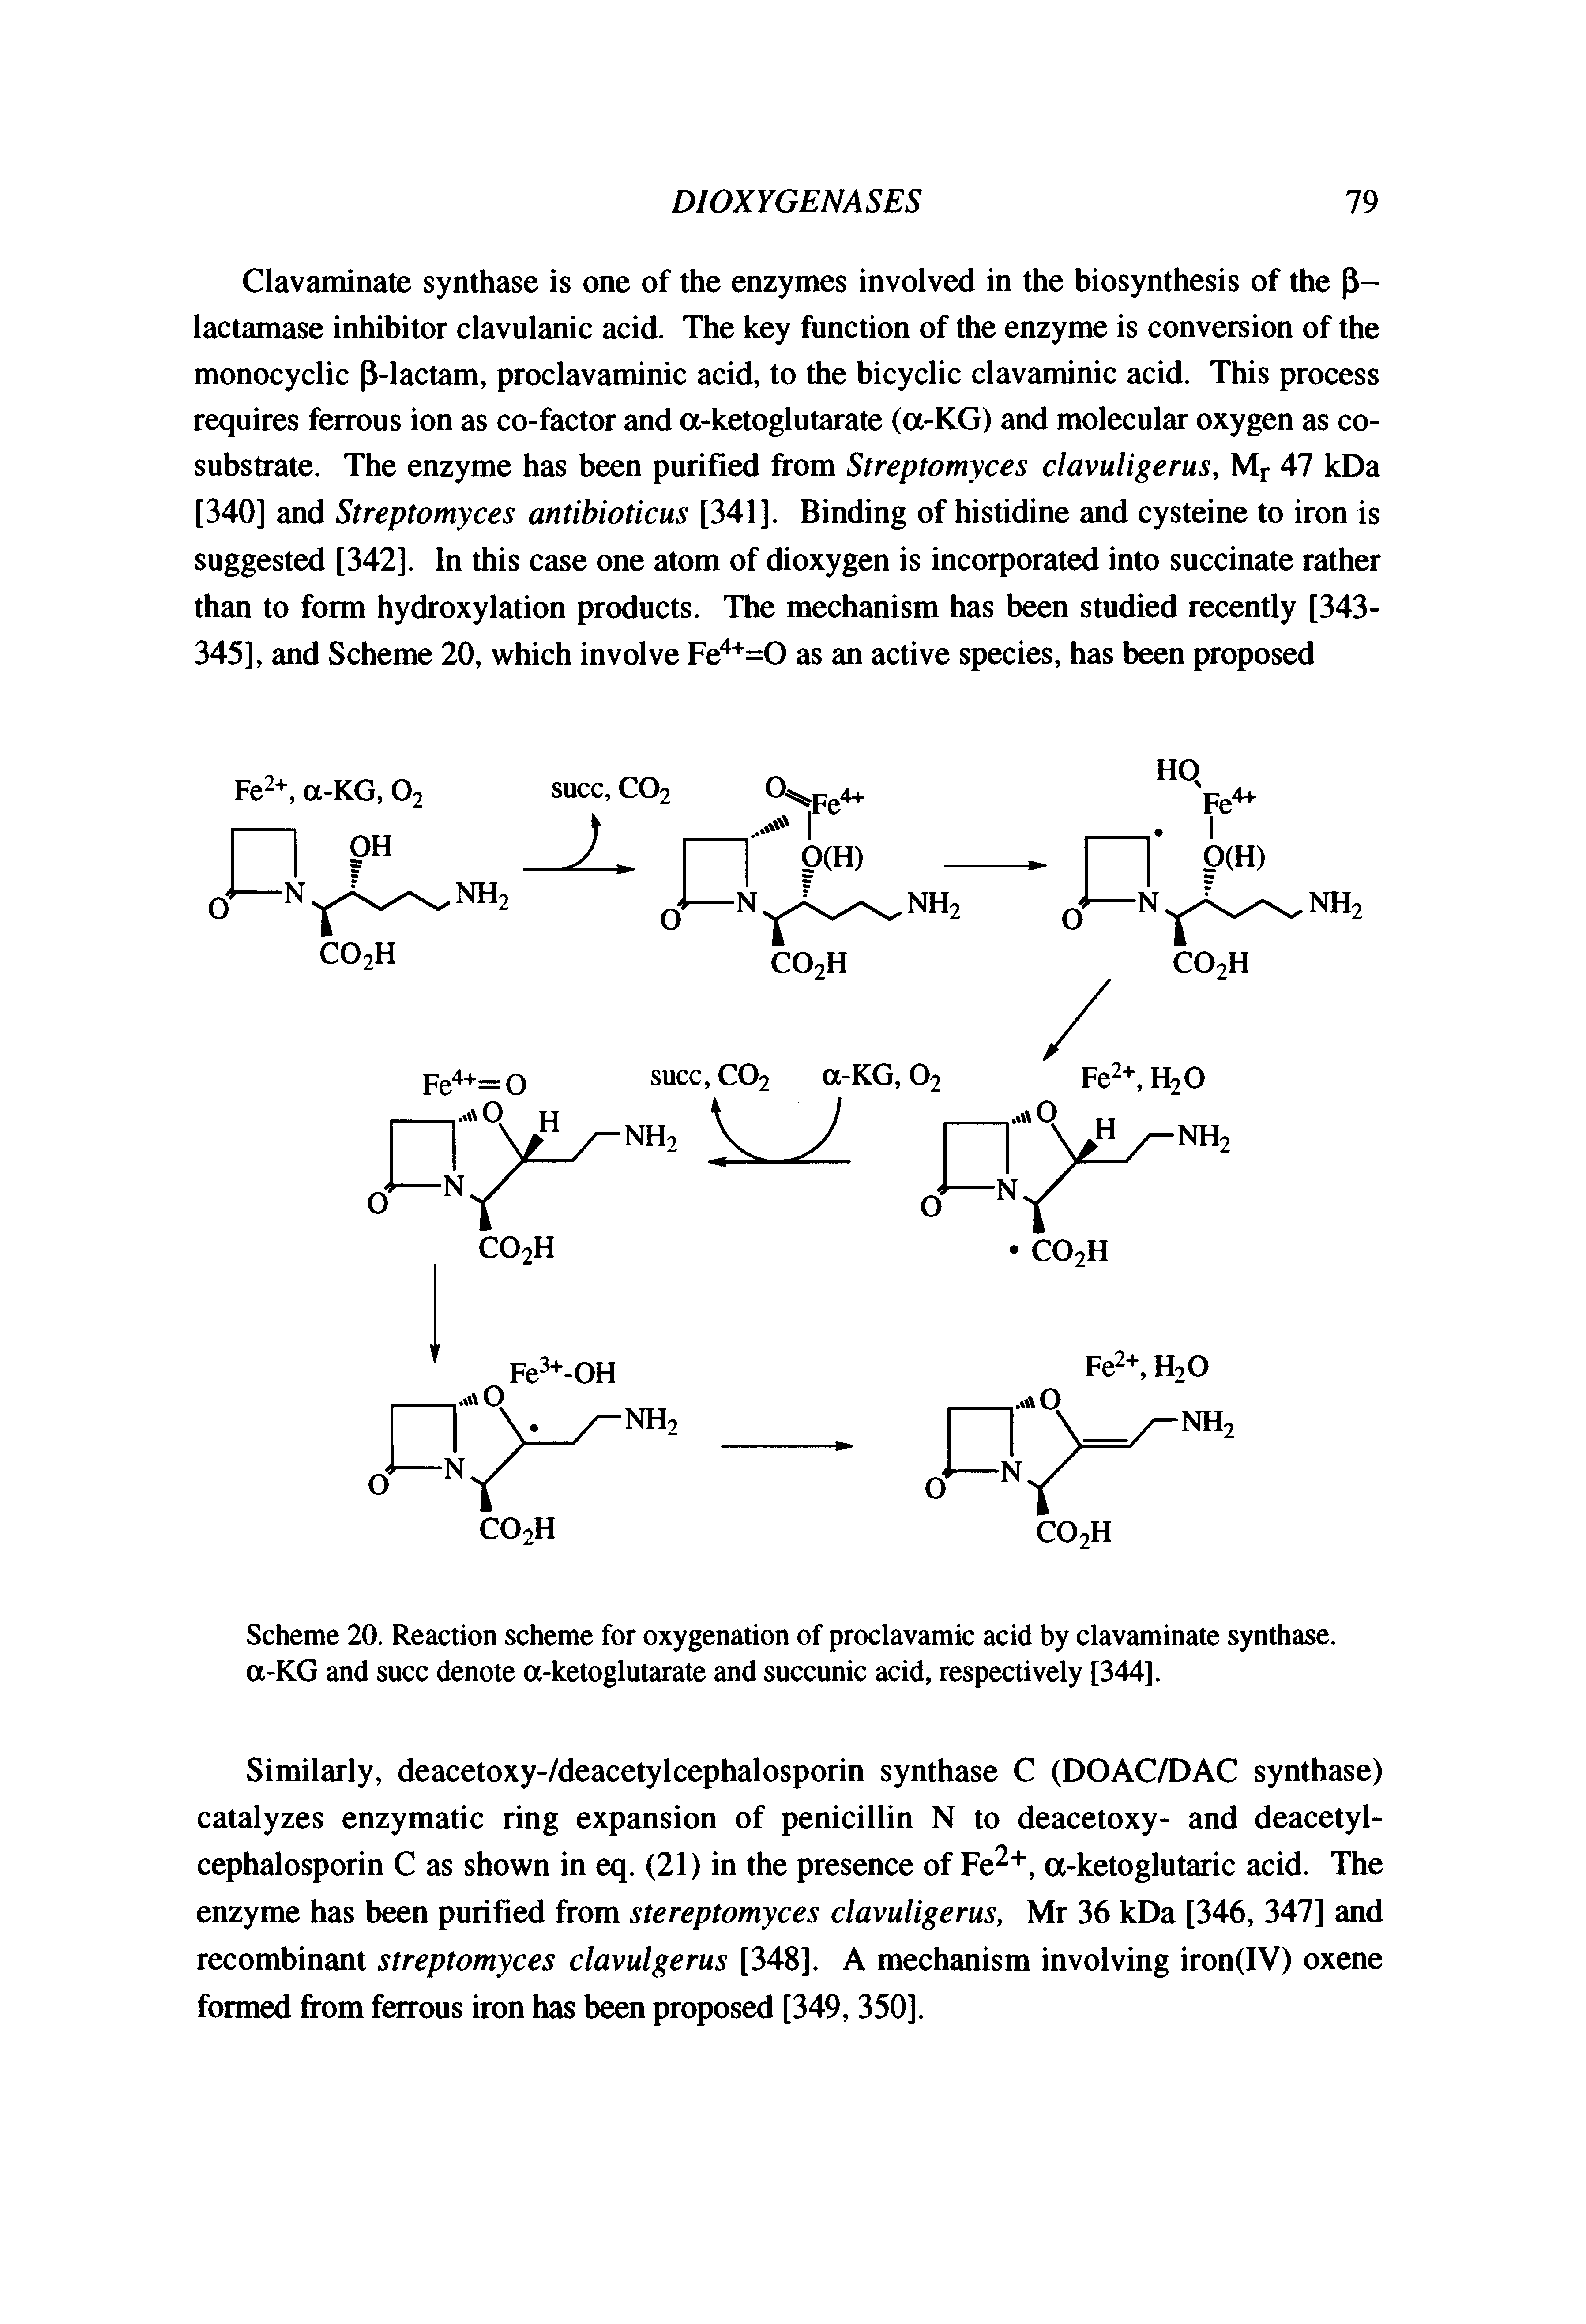 Scheme 20. Reaction scheme for oxygenation of proclavamic acid by clavaminate synthase. a-KG and succ denote a-ketoglutarate and succunic acid, respectively [344].